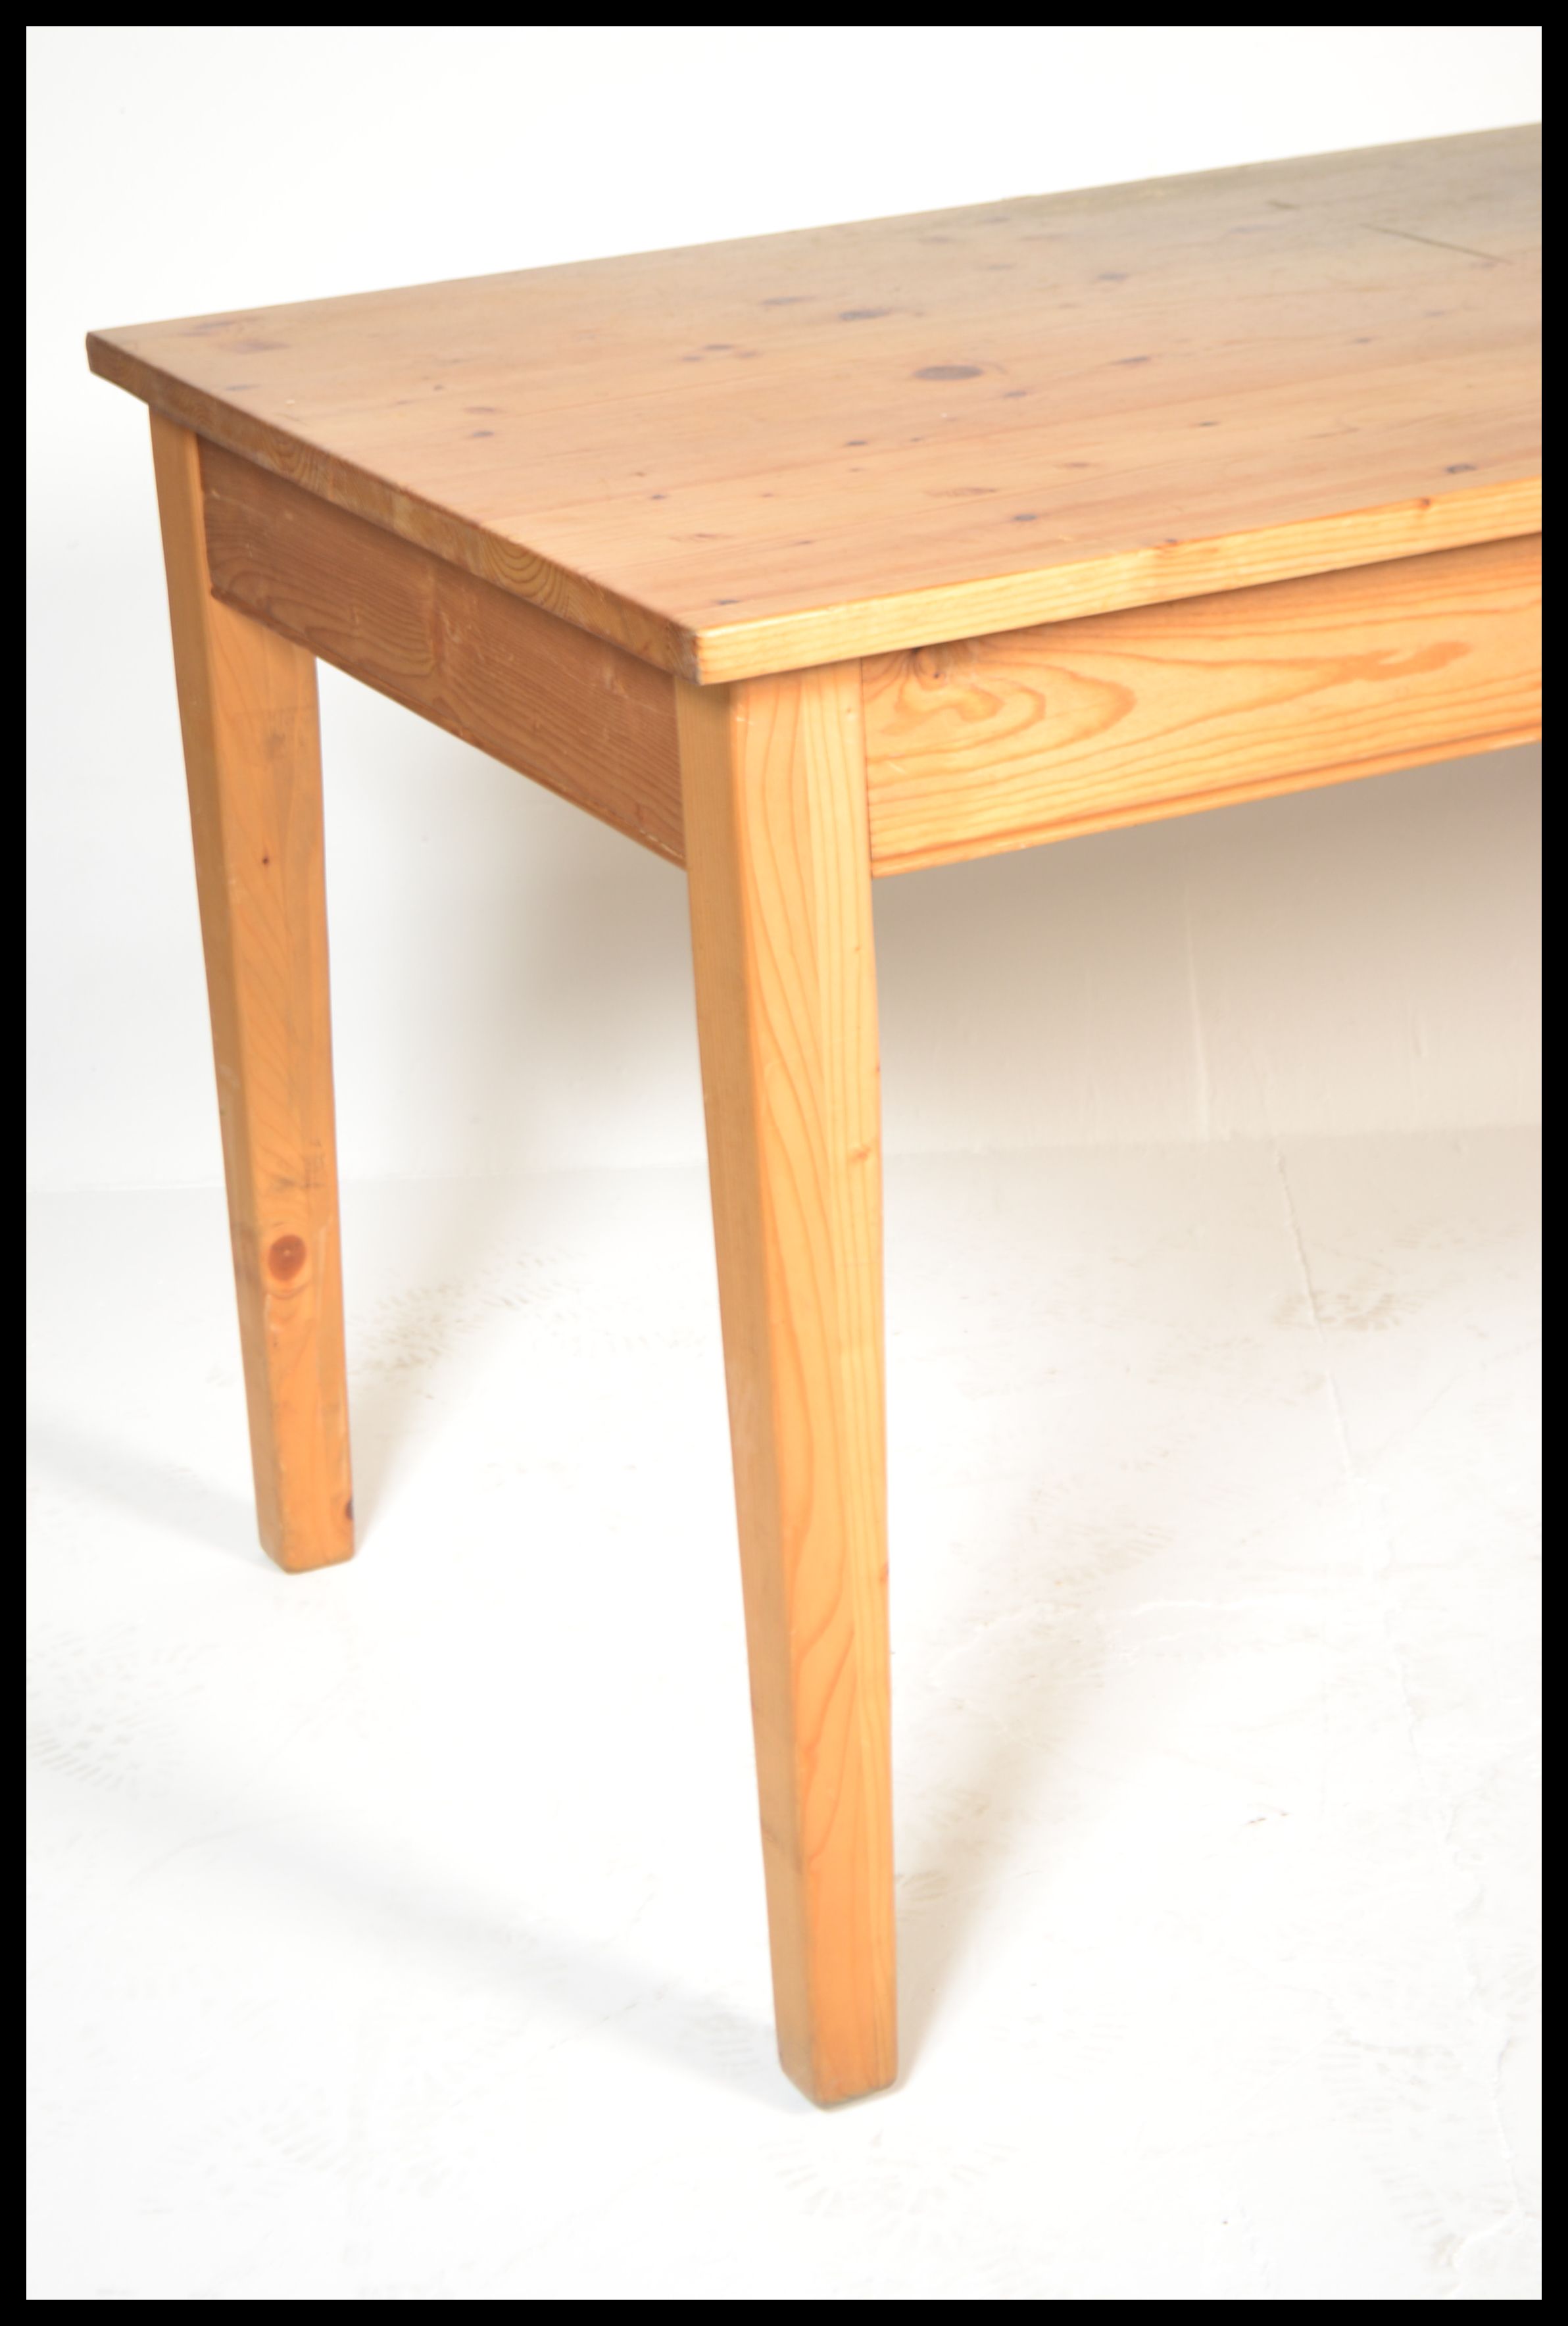 A 20th century antique style pine farmhouse dining table of rectangular form with thick plank top, - Image 3 of 4